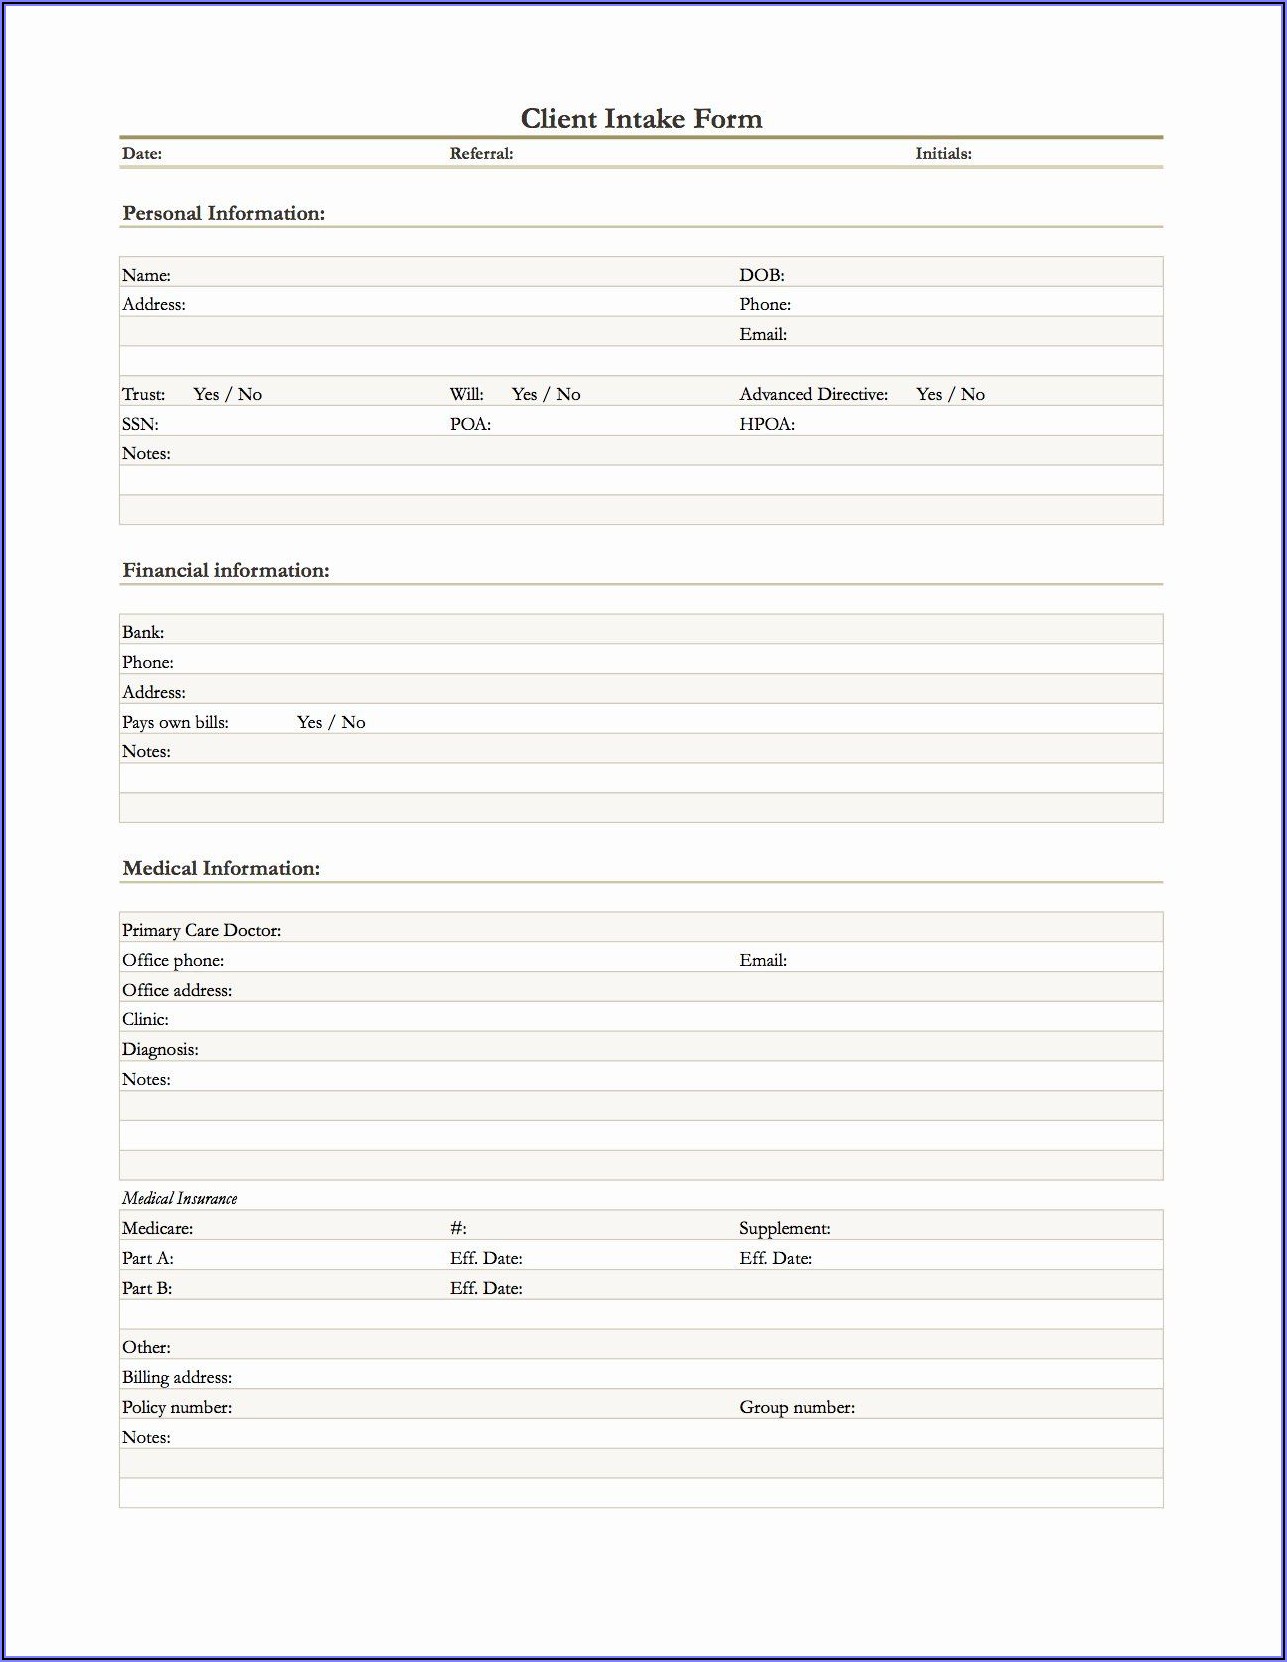 Real Estate Client Intake Form Template